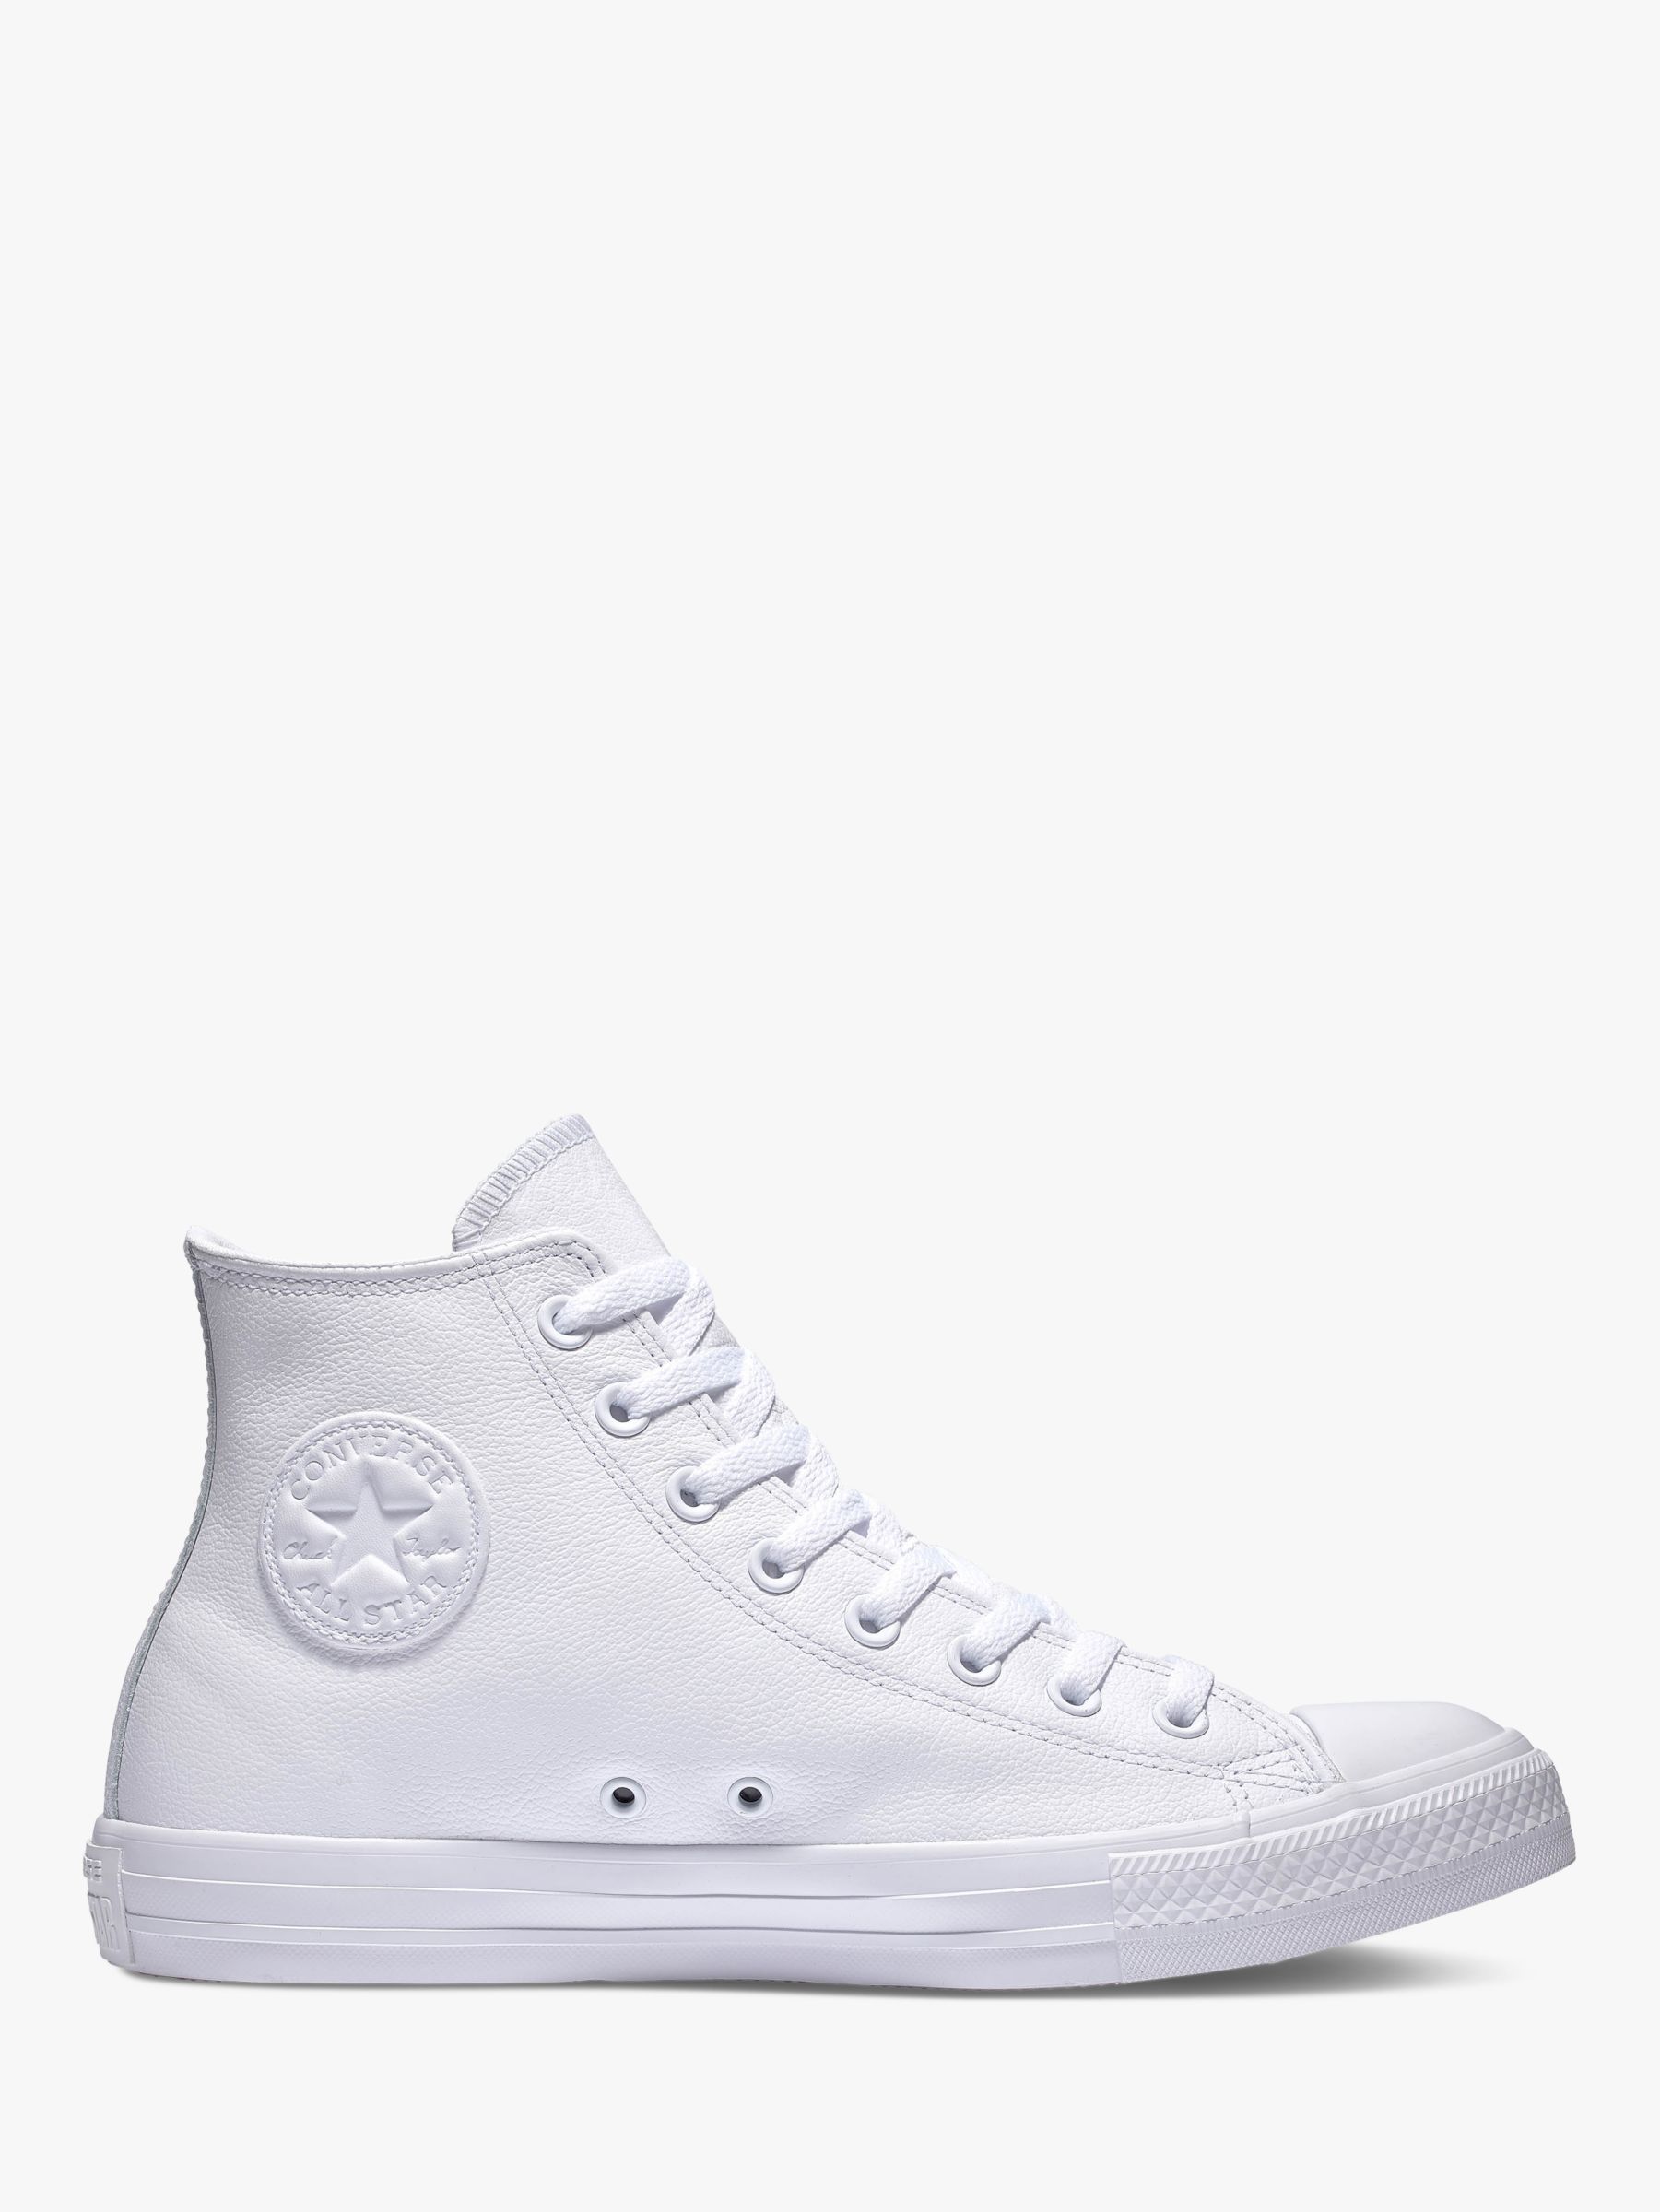 Converse All Star Leather Hi-Top Trainers, White Monochrome at John Lewis \u0026  Partners